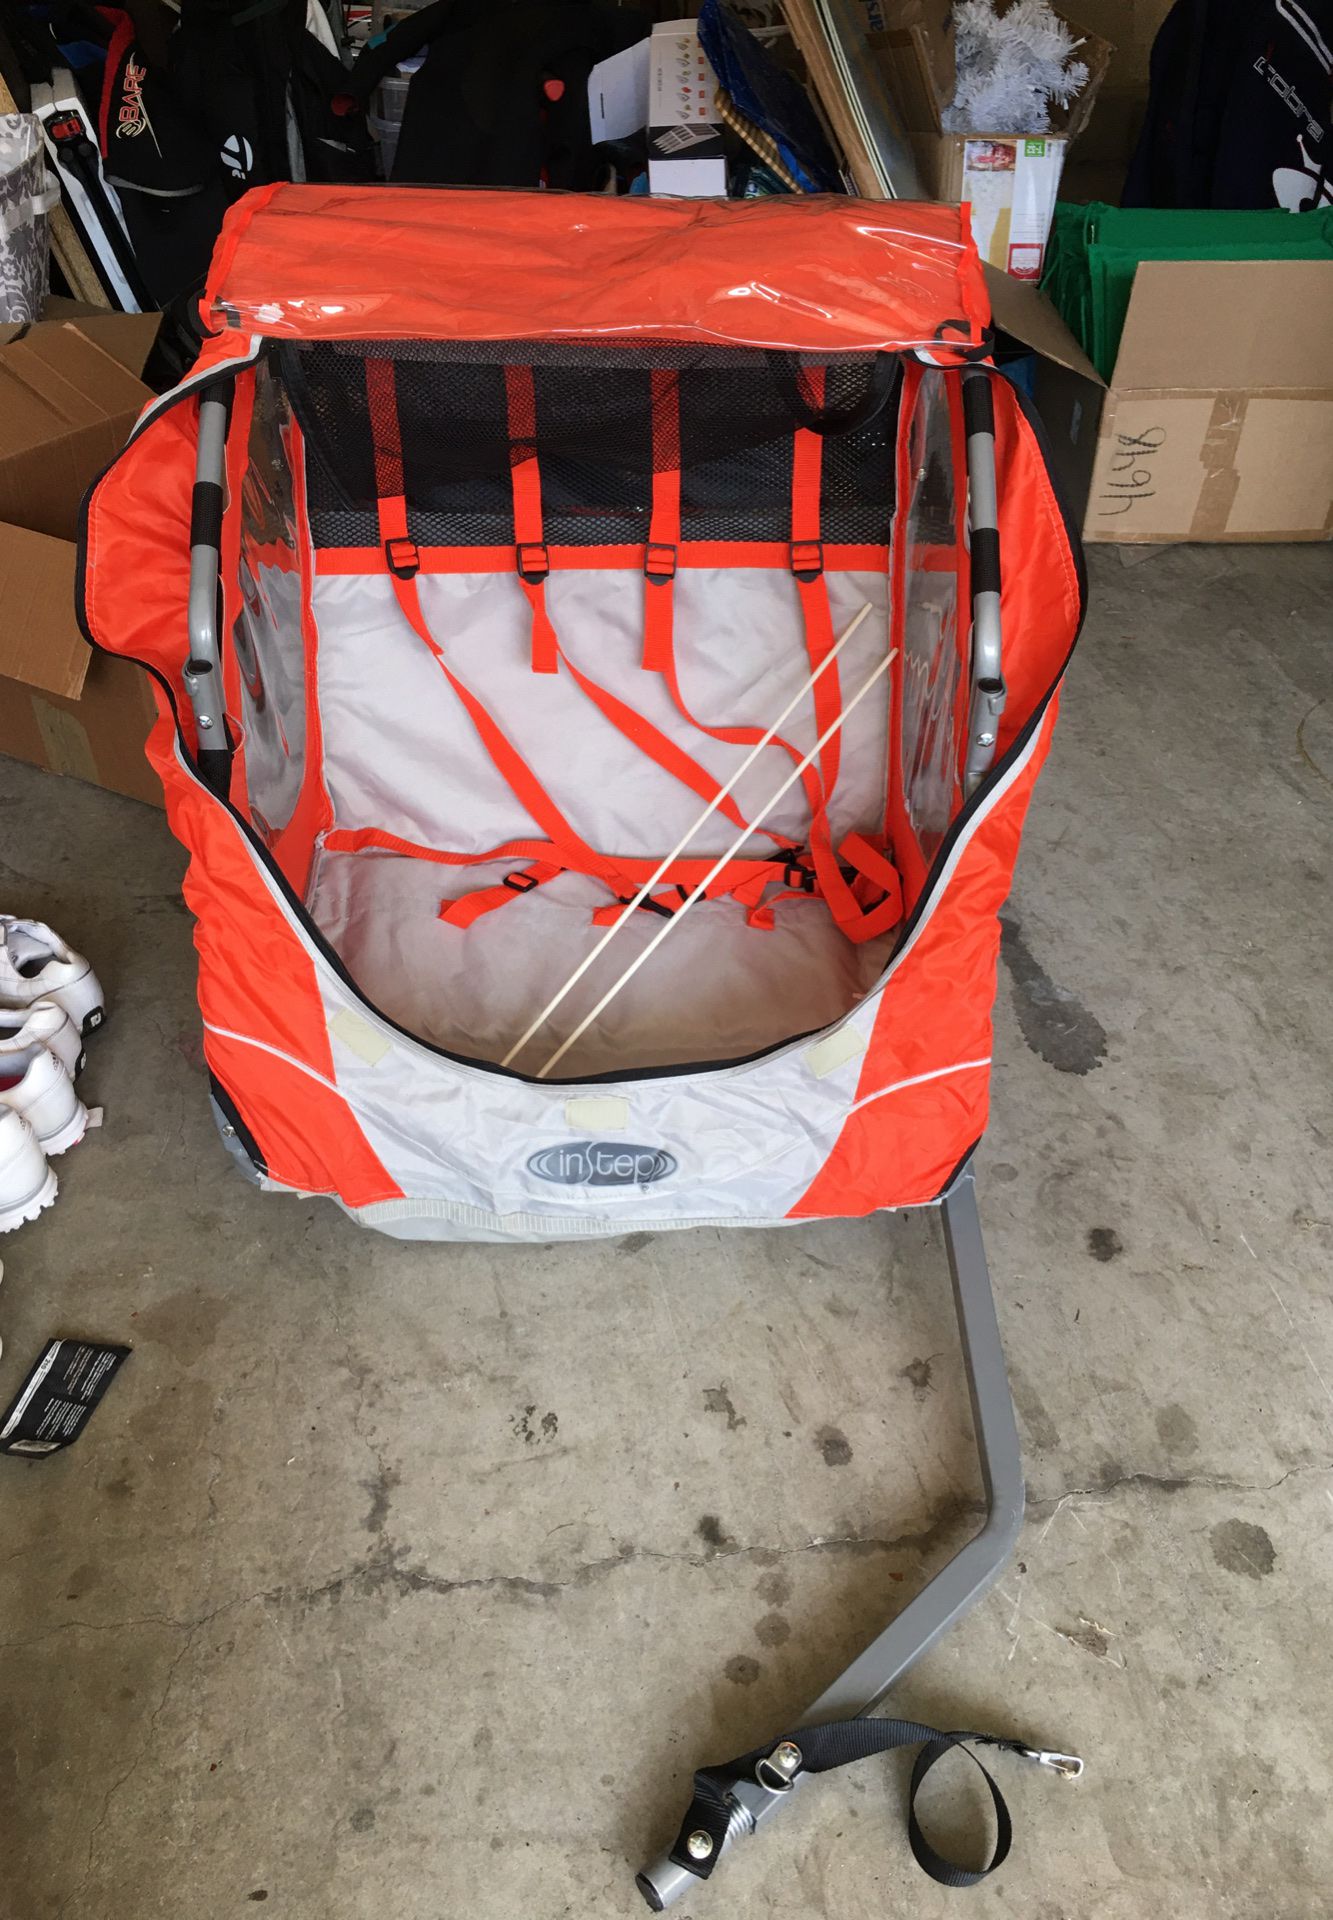 Instep Bike Trailer, double, orange, only used twice. Sells for $150 new, will sell for $70.